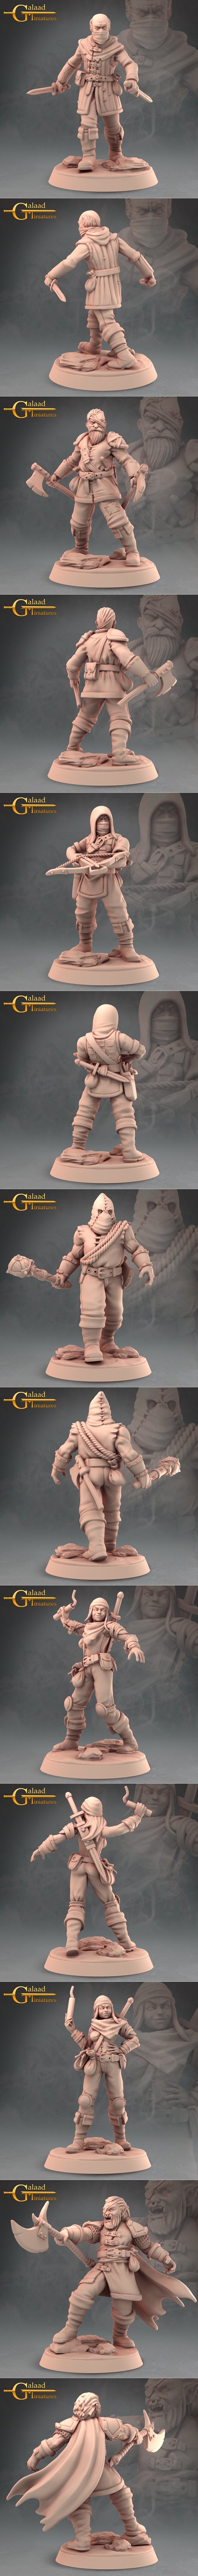 Into The Woods - Bandits – 3D Printable STL